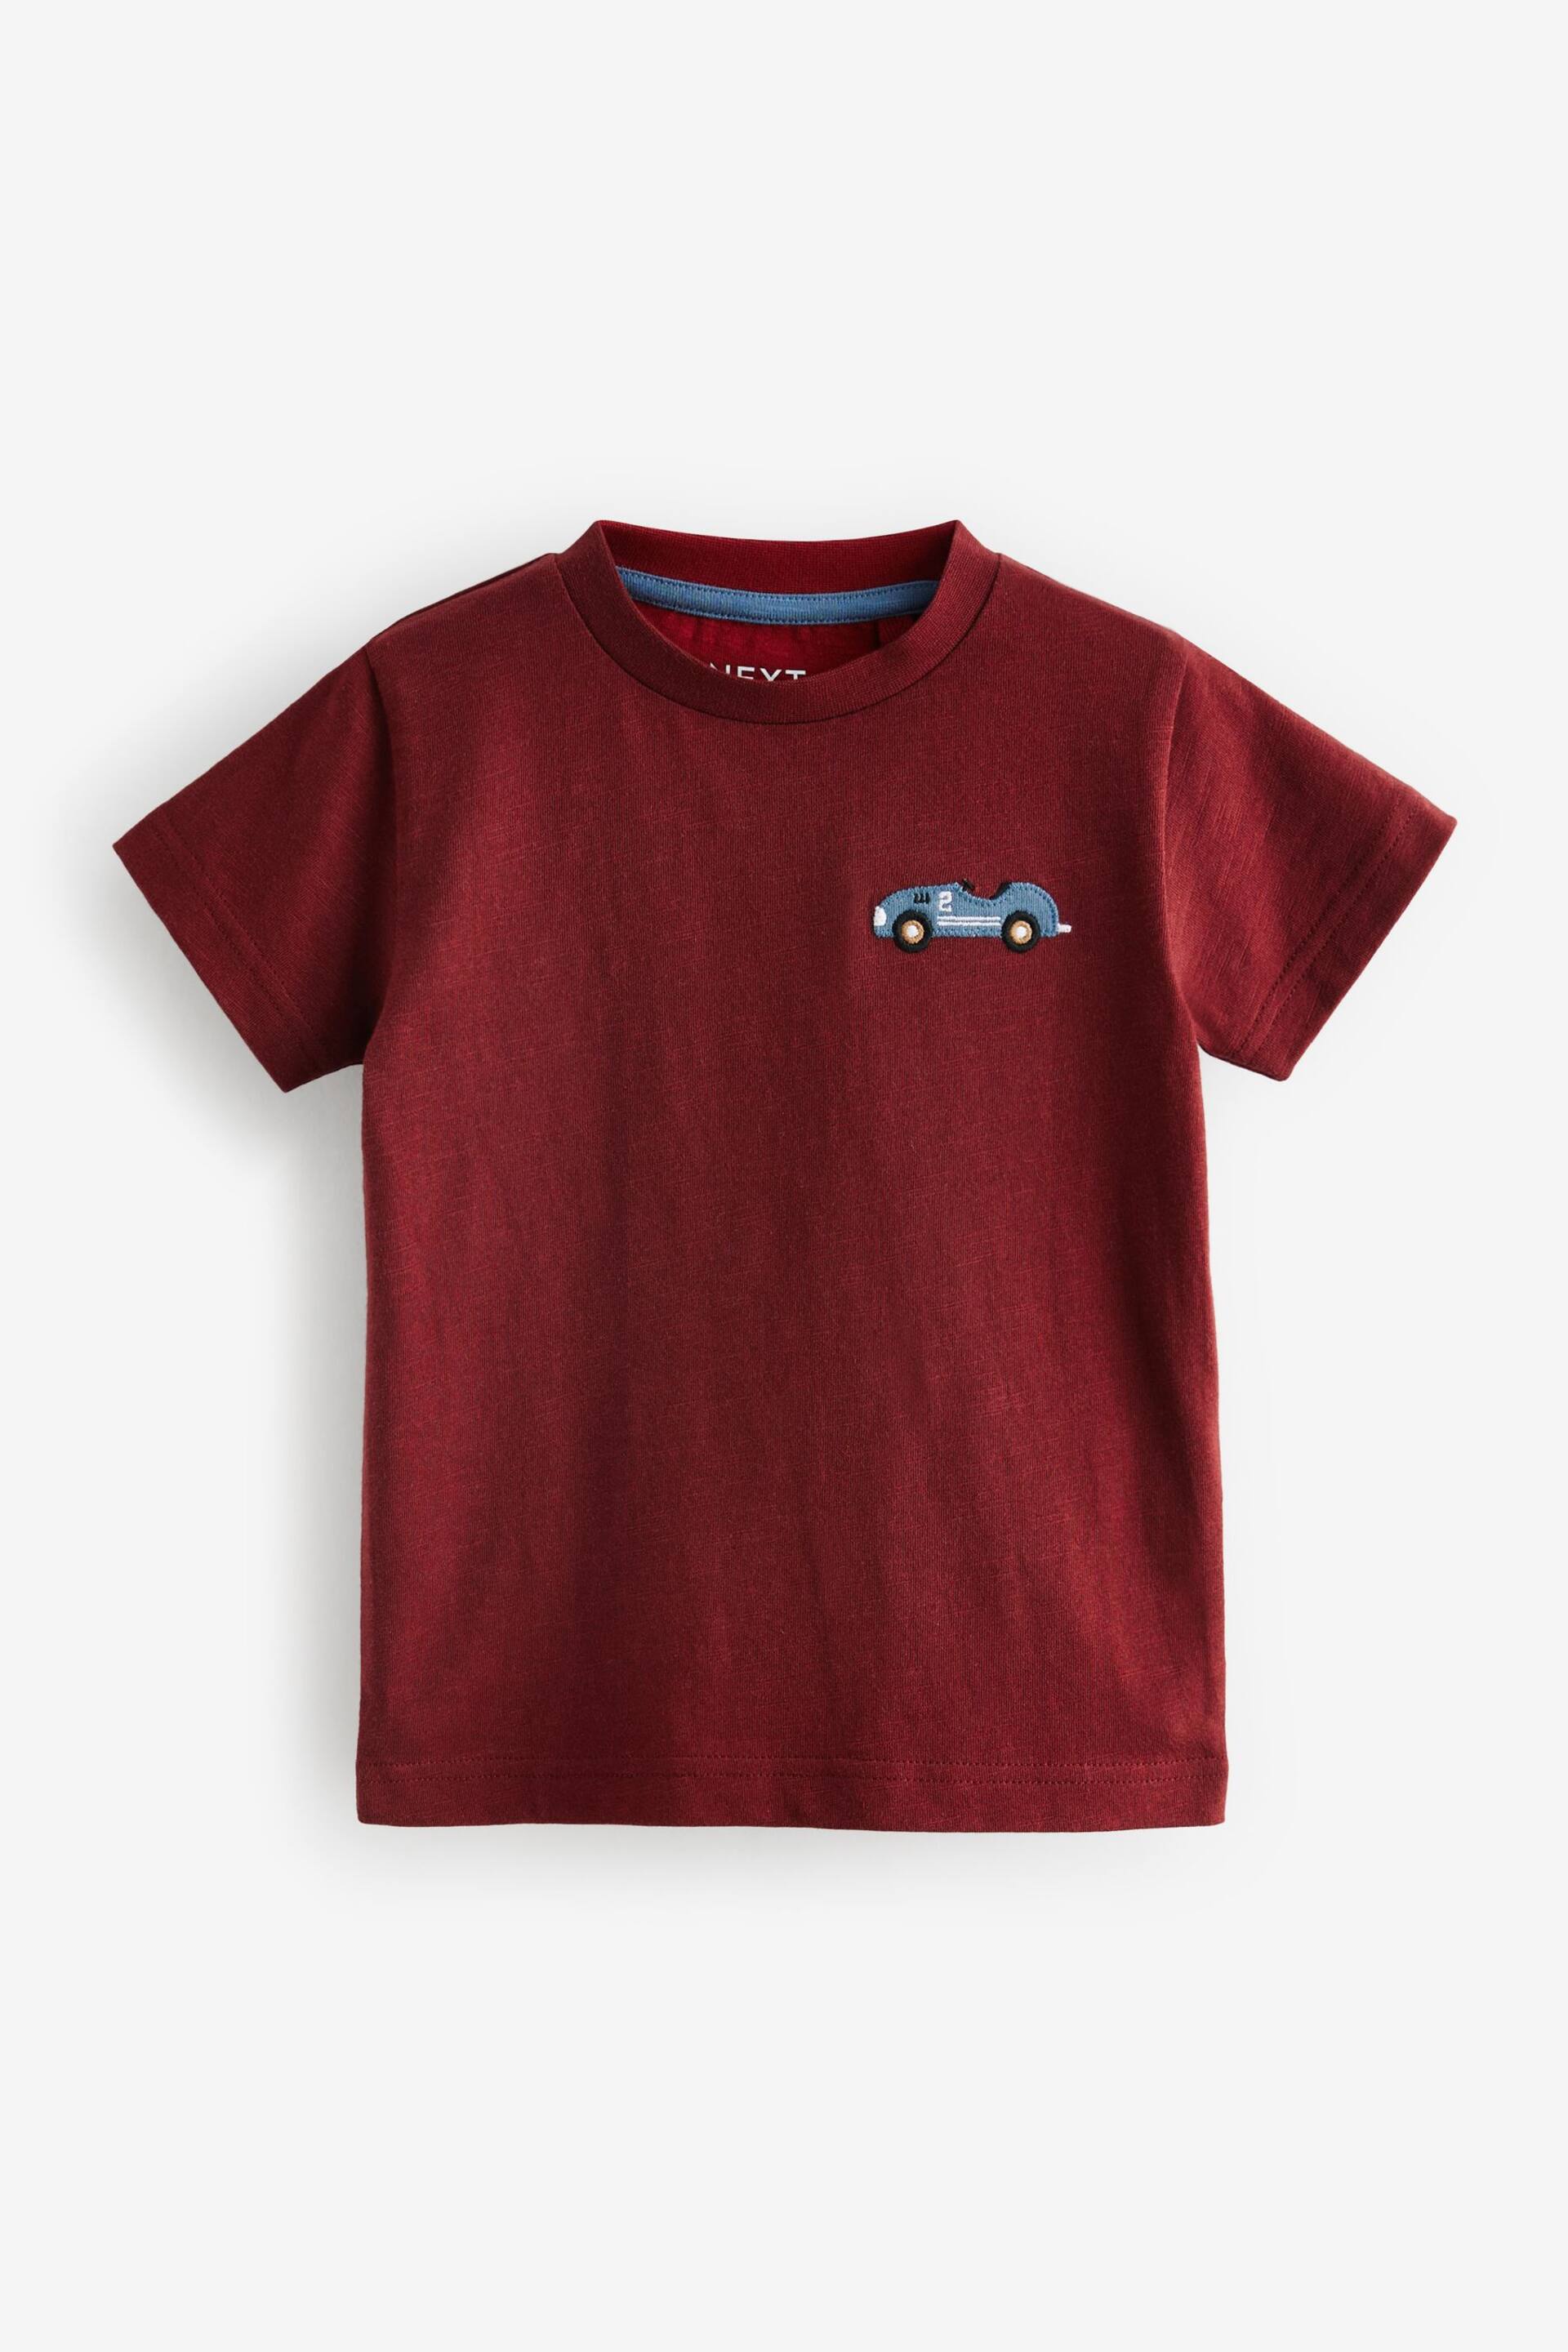 Red/Blue Cars Short Sleeve Character T-Shirts 3 Pack (3mths-7yrs) - Image 2 of 4